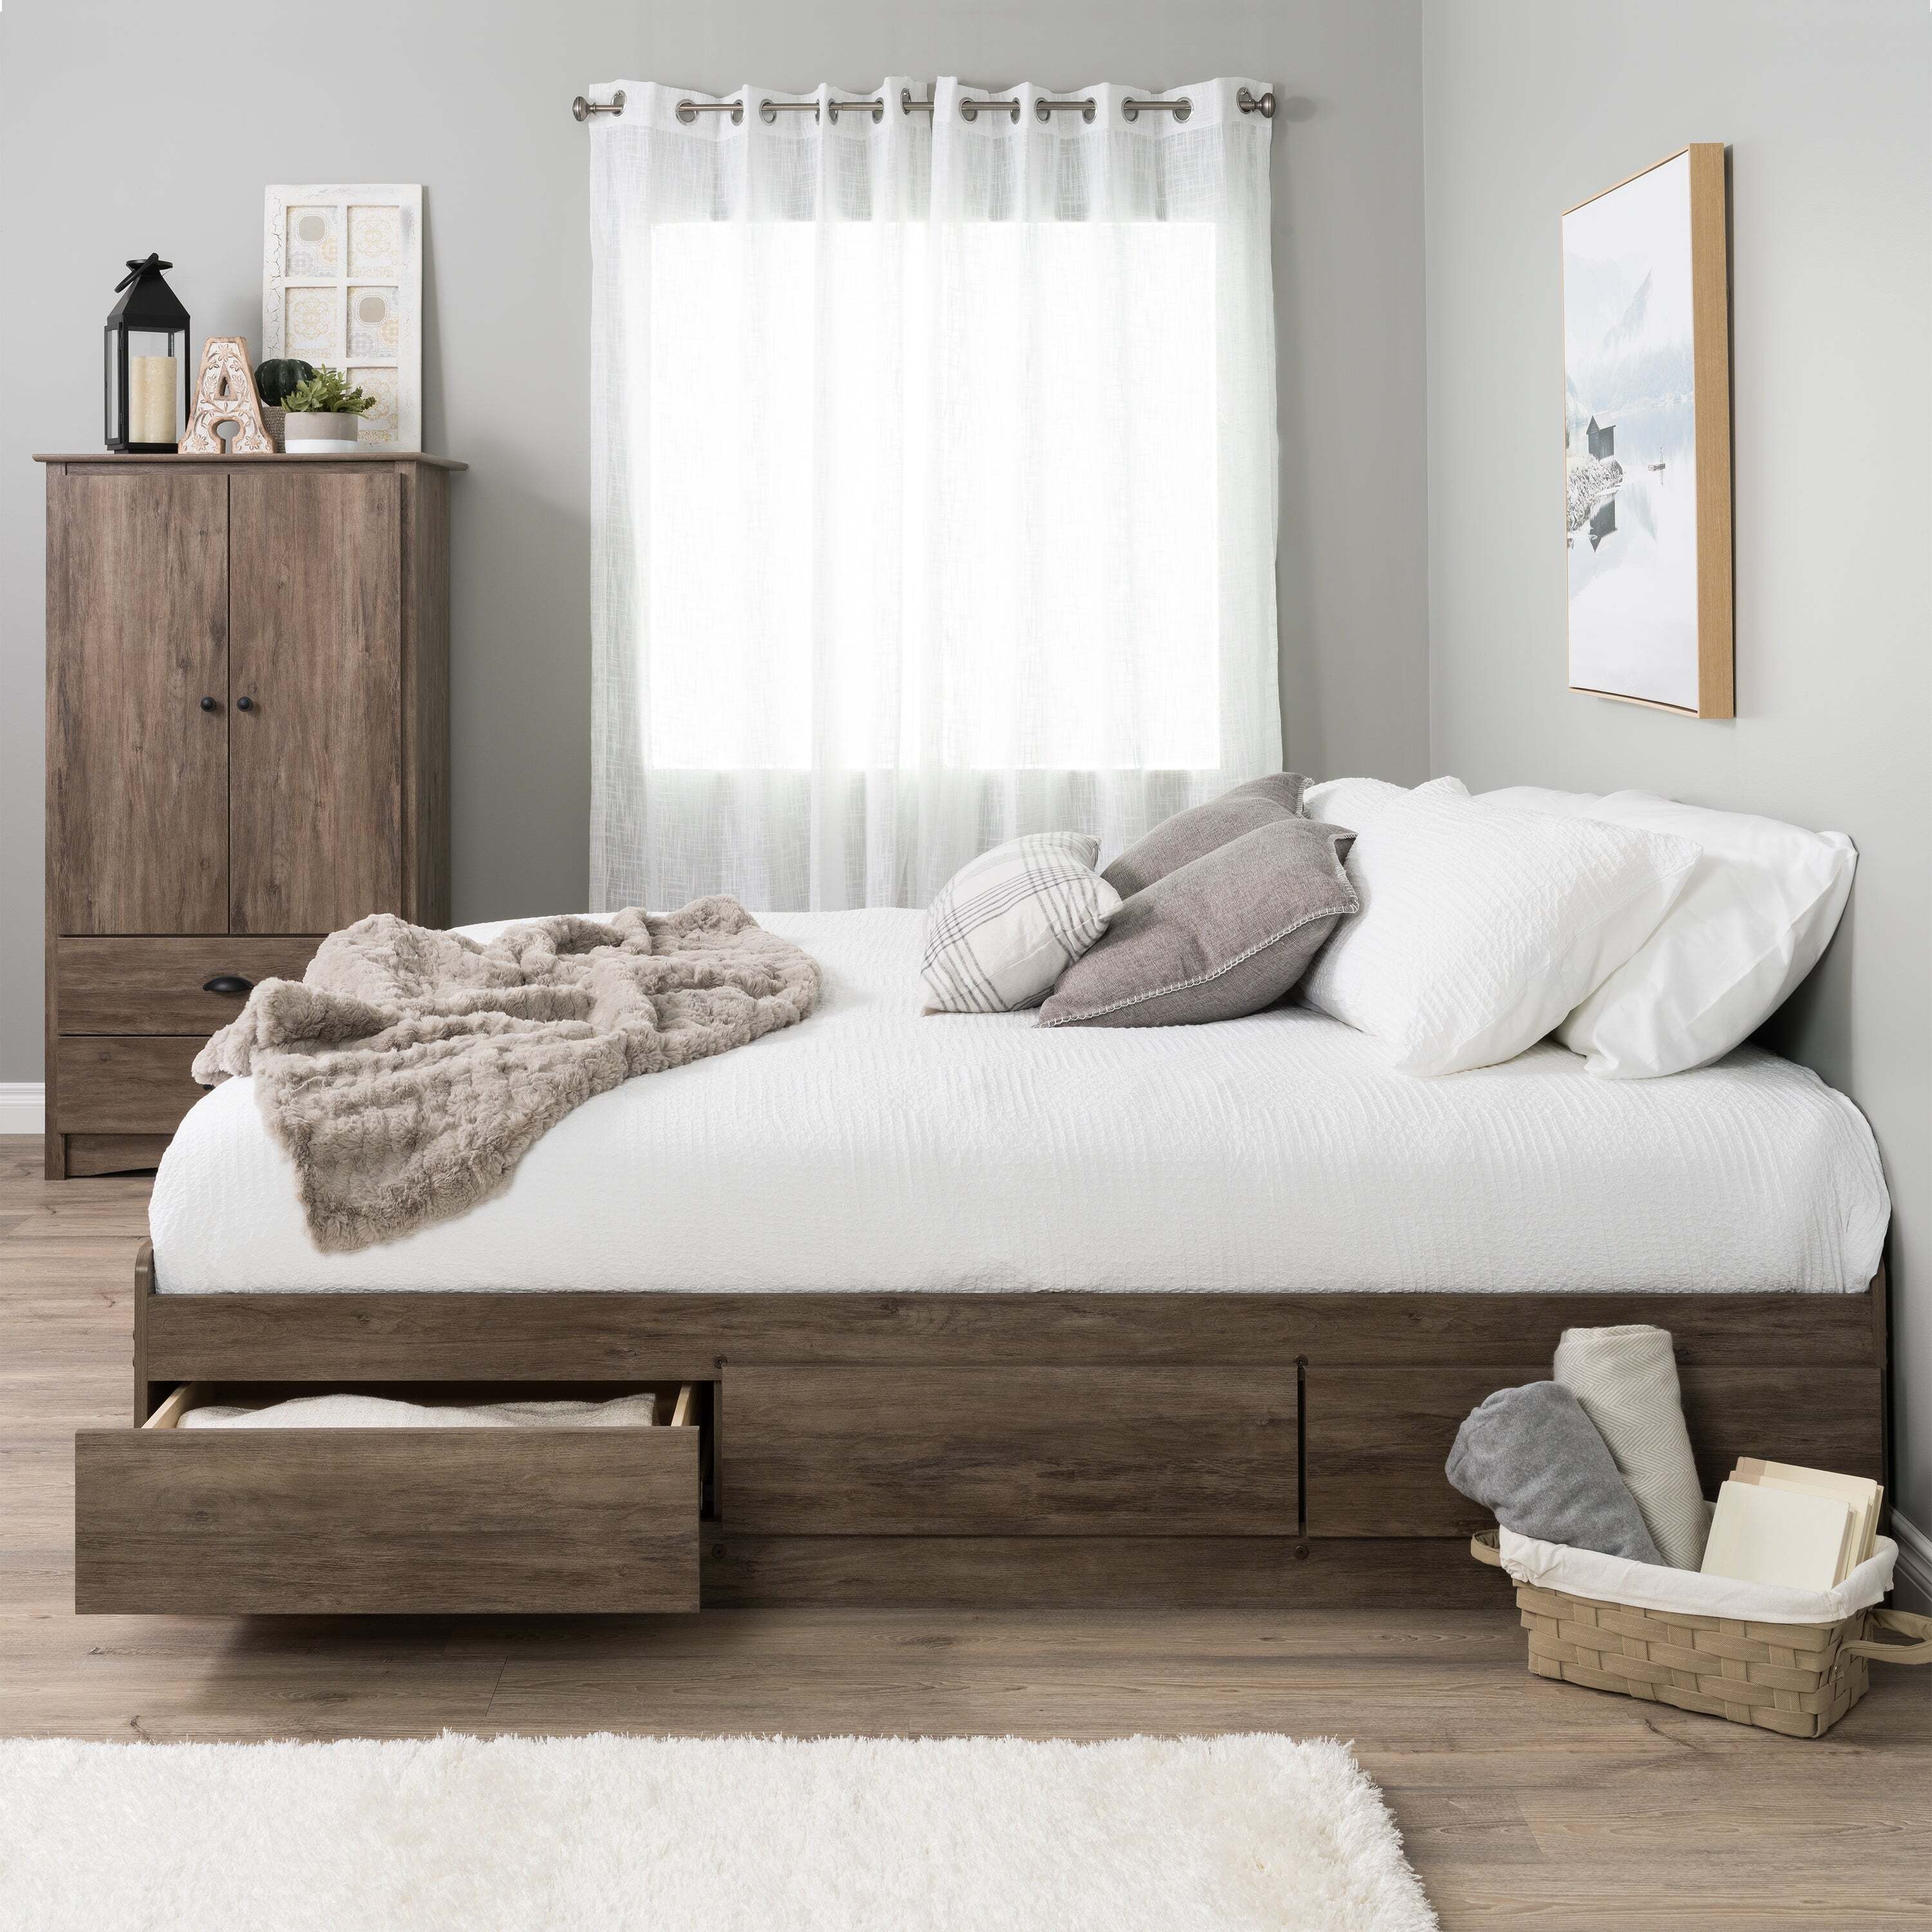 Wood platform bed with two drawers Twin/Full Size Bed Frame With Headboard White 